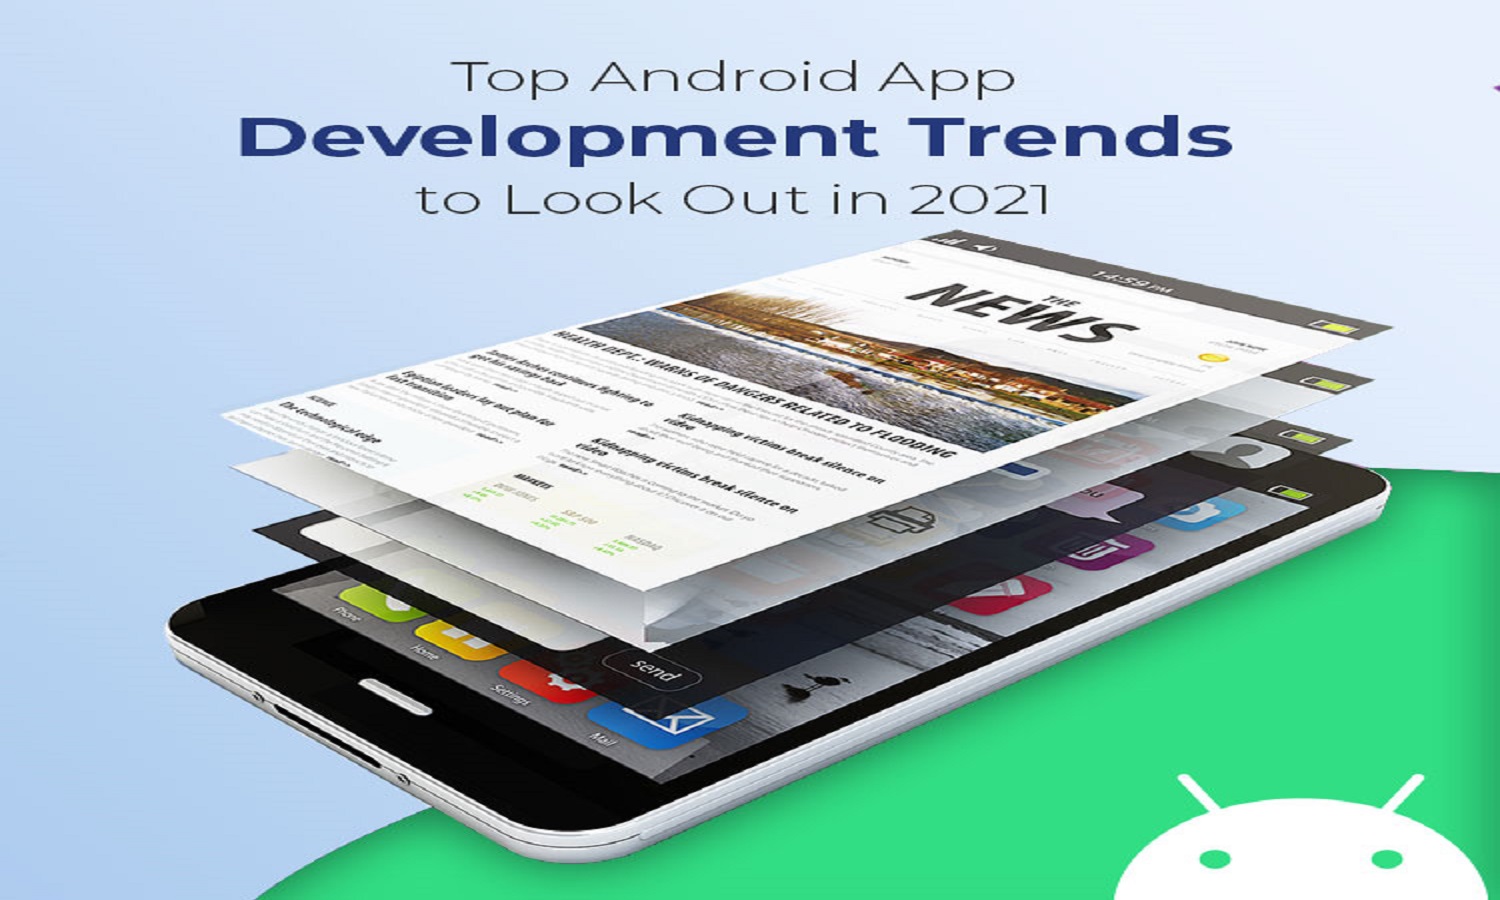 Top Android App Development Trends to Look Out in 2021